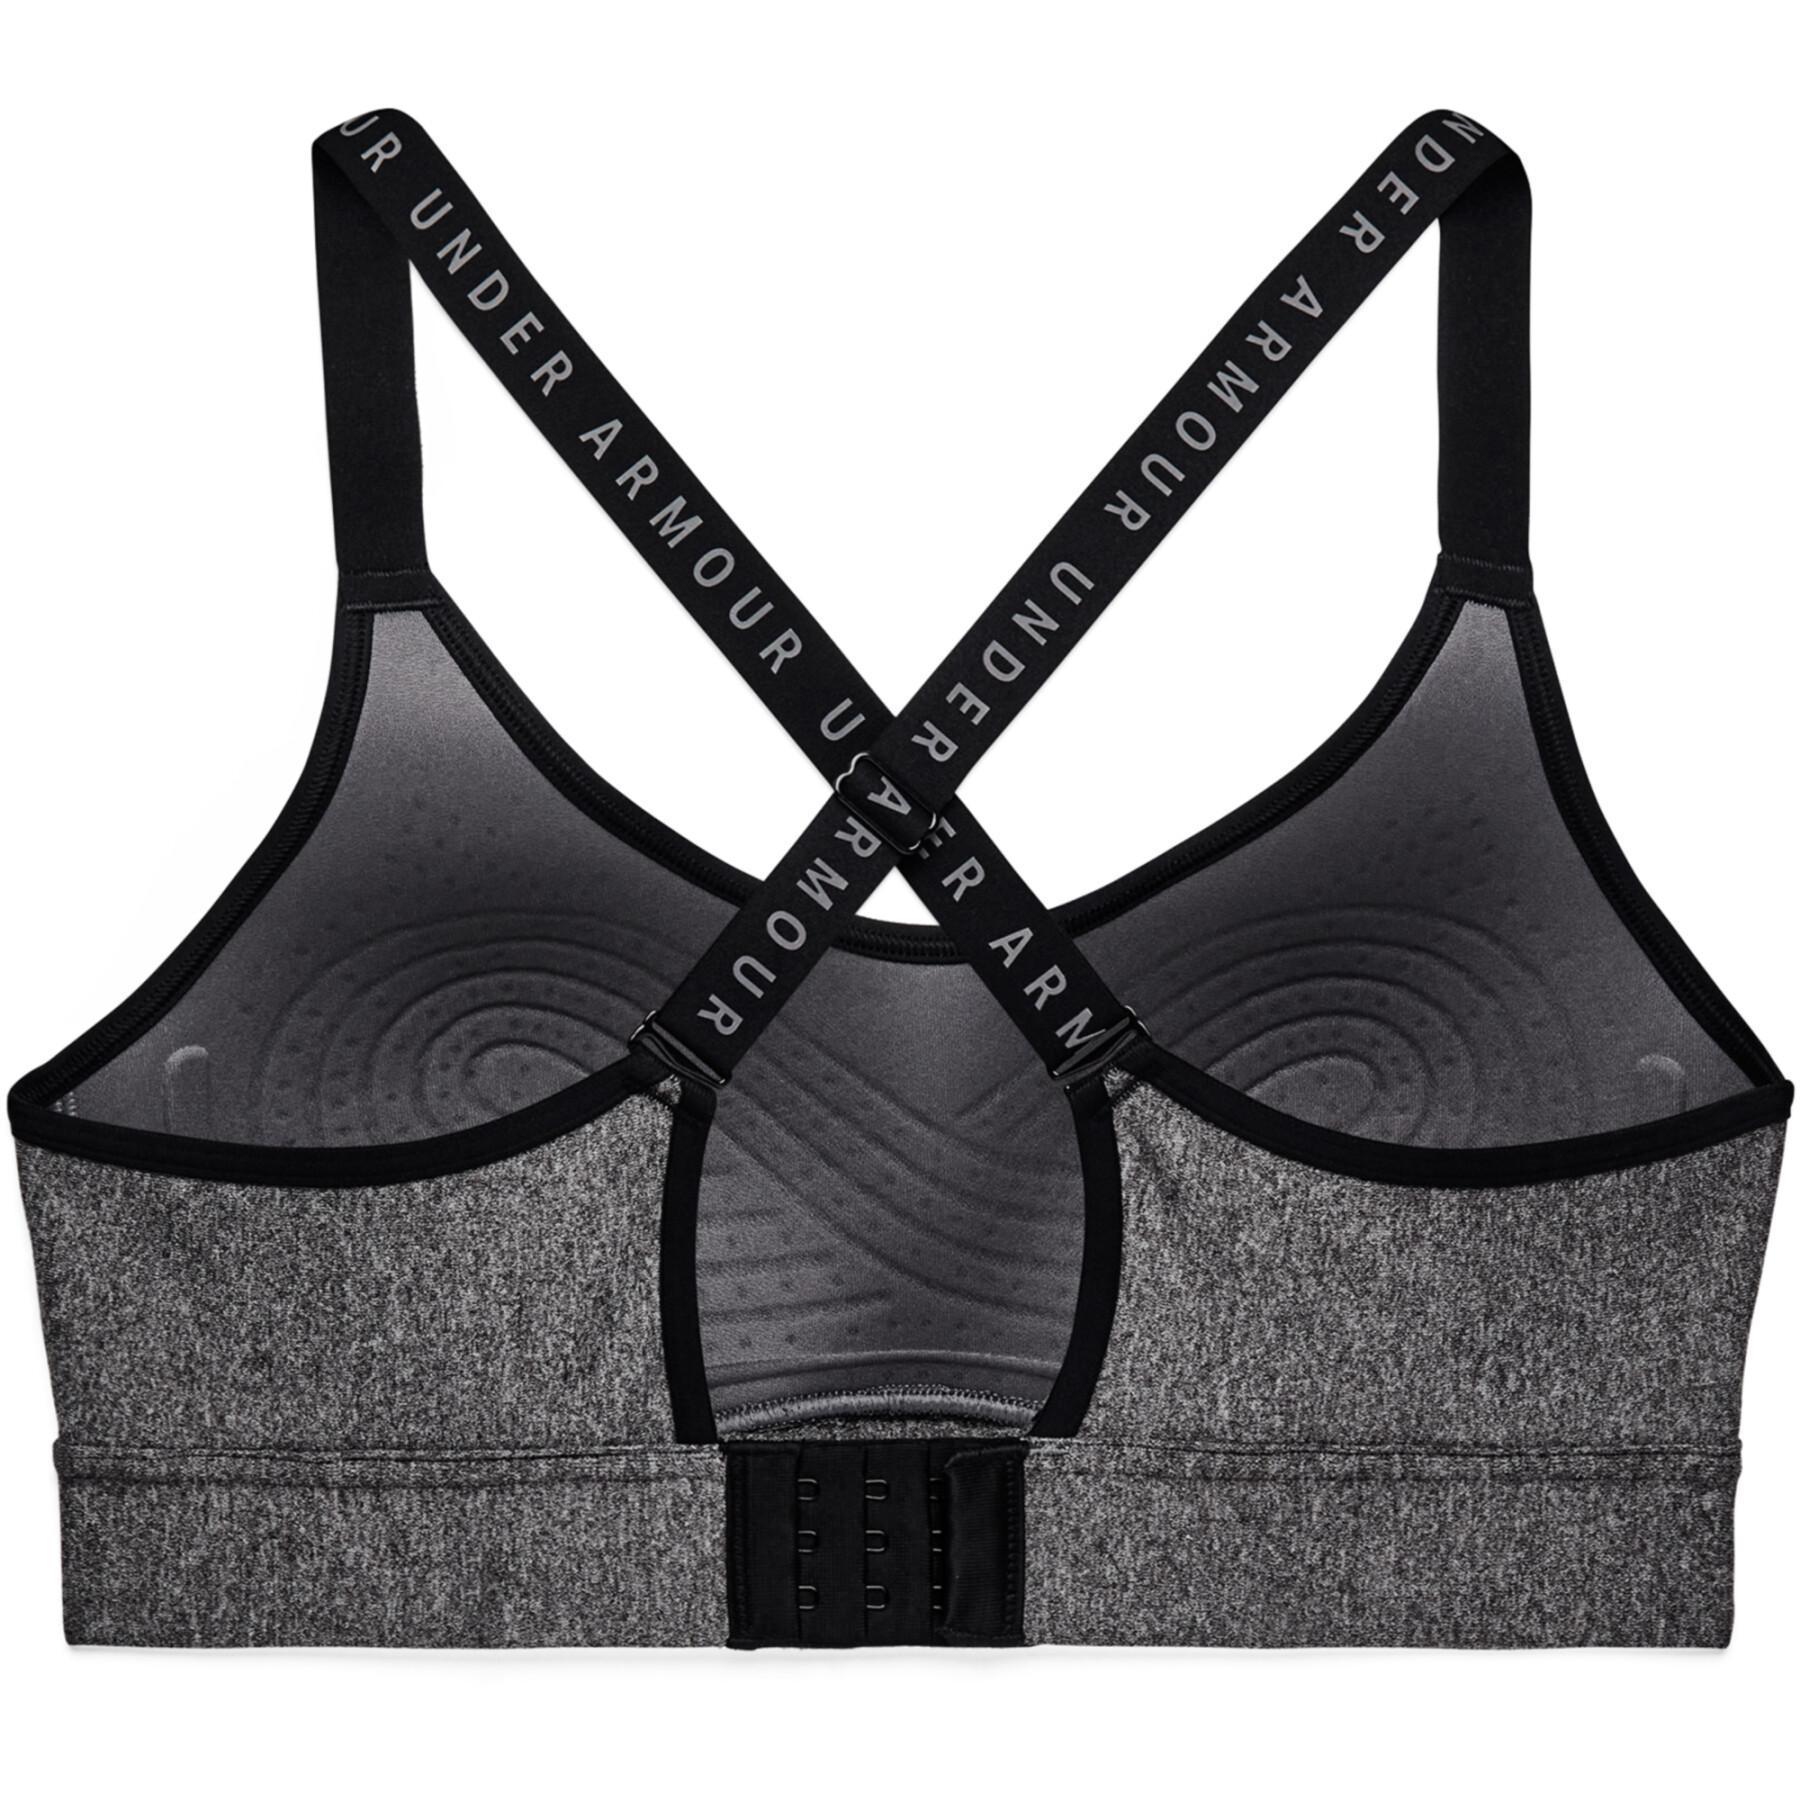 Moderate support sports bra for women Under Armour Infinity heather cover